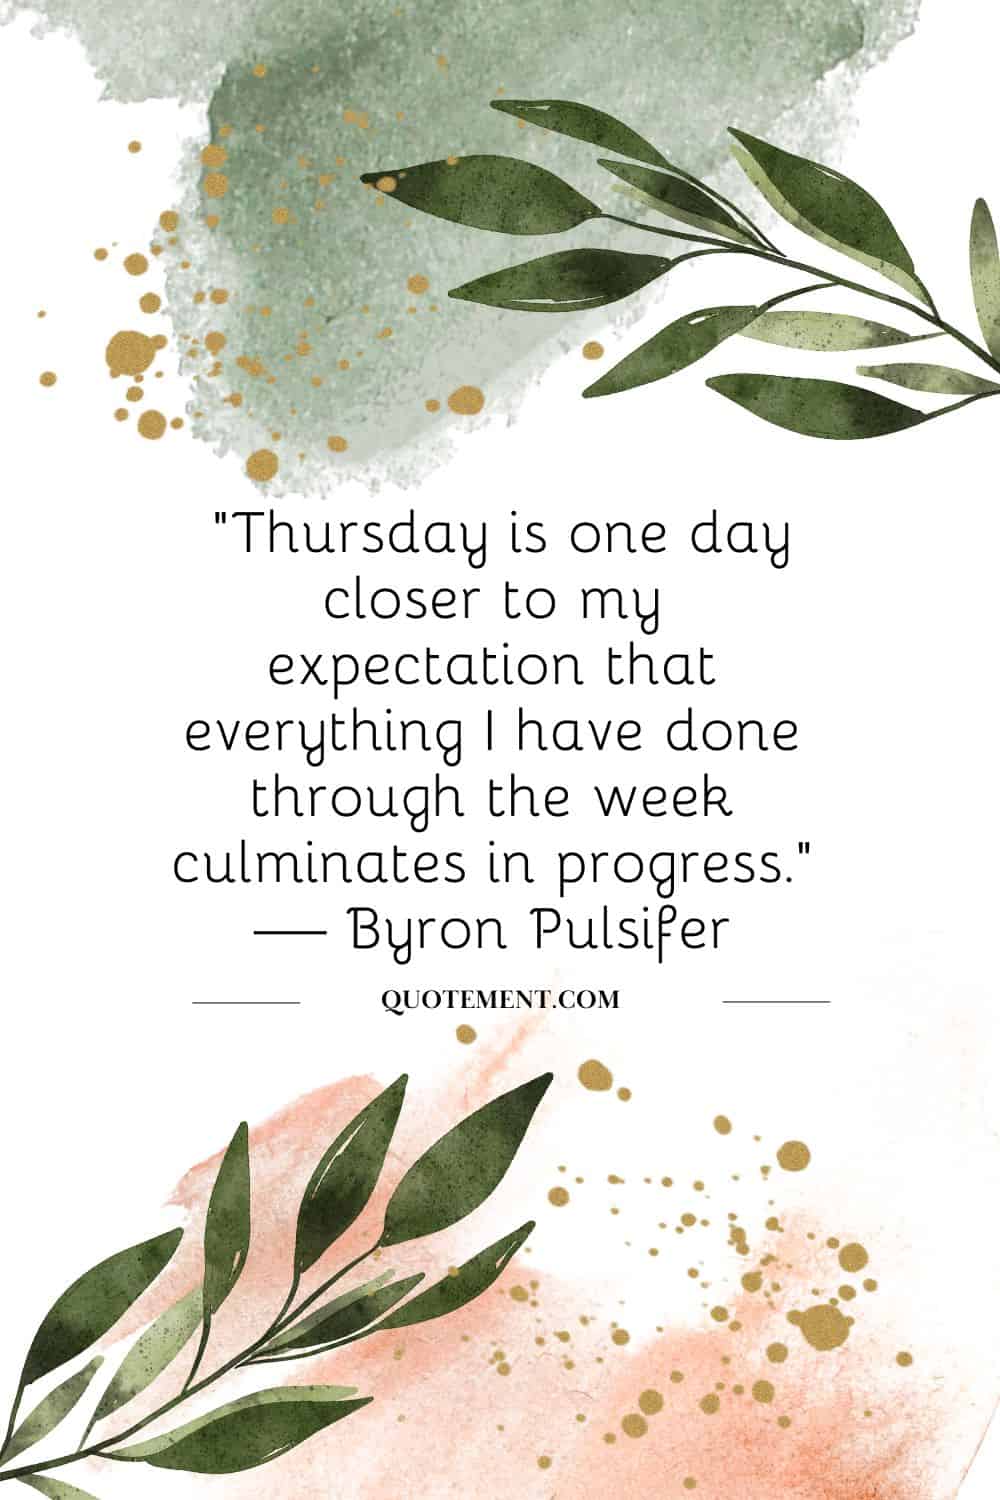 “Thursday is one day closer to my expectation that everything I have done through the week culminates in progress.” — Byron Pulsifer